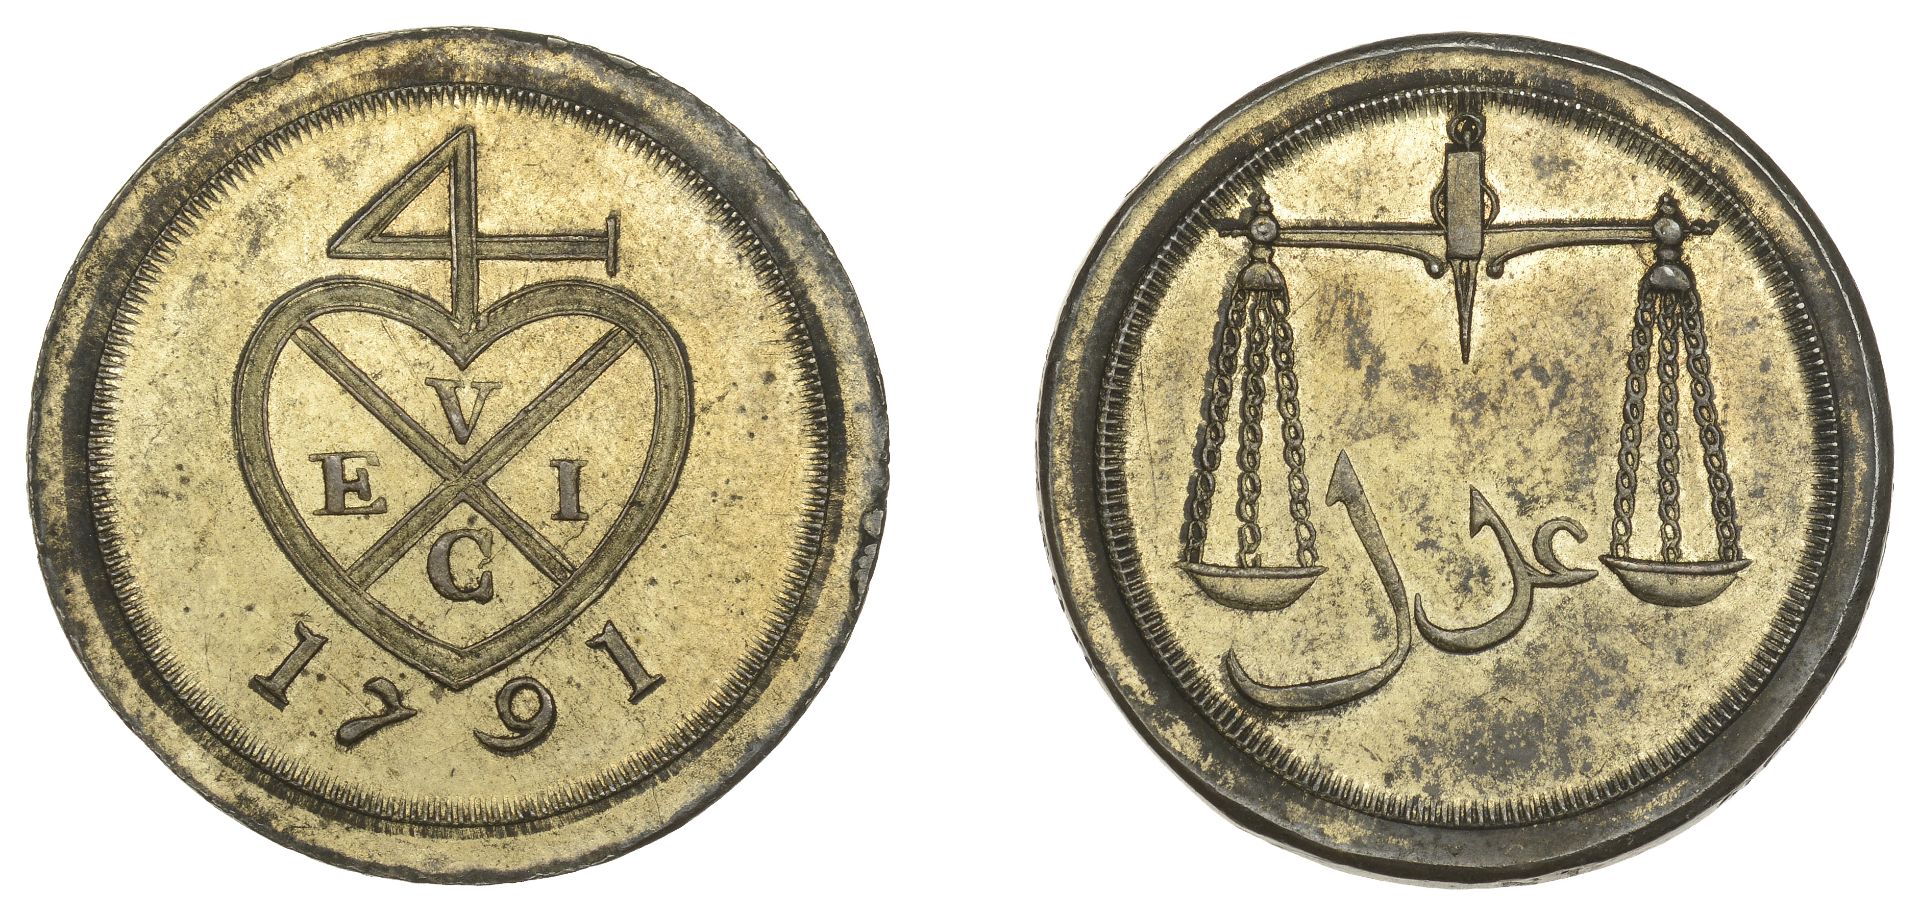 East India Company, Bombay Presidency, European Minting, 1791-4, Soho, a plated copper Trial...